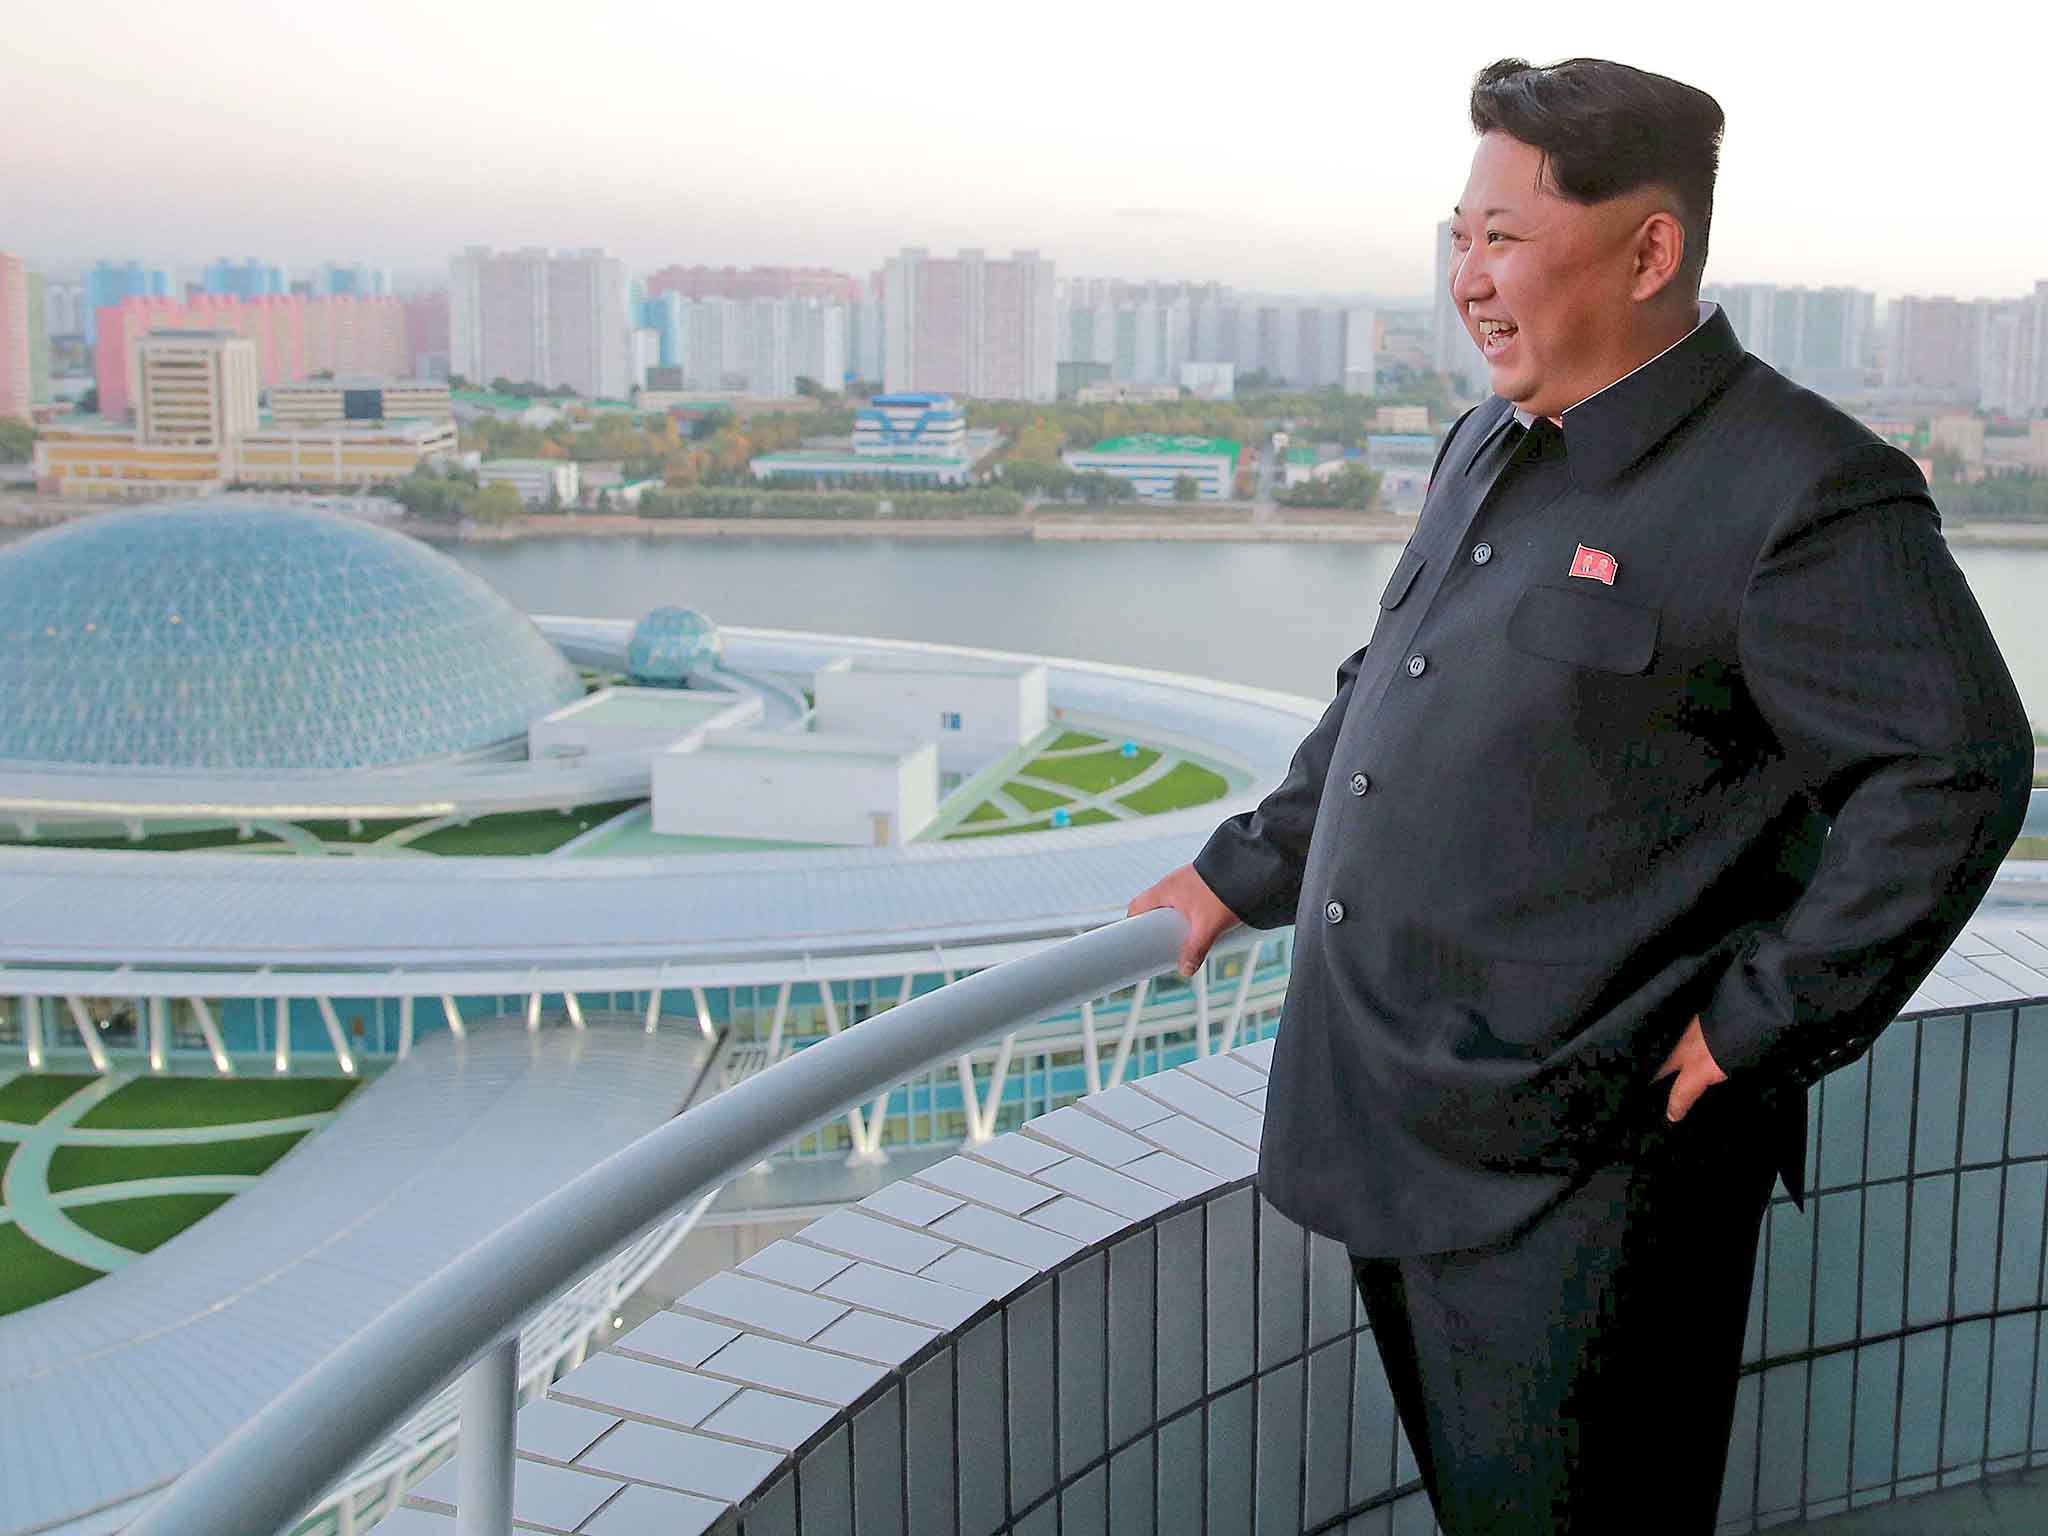 North Korea announced that it had successfully test-fired an intercontinental missile